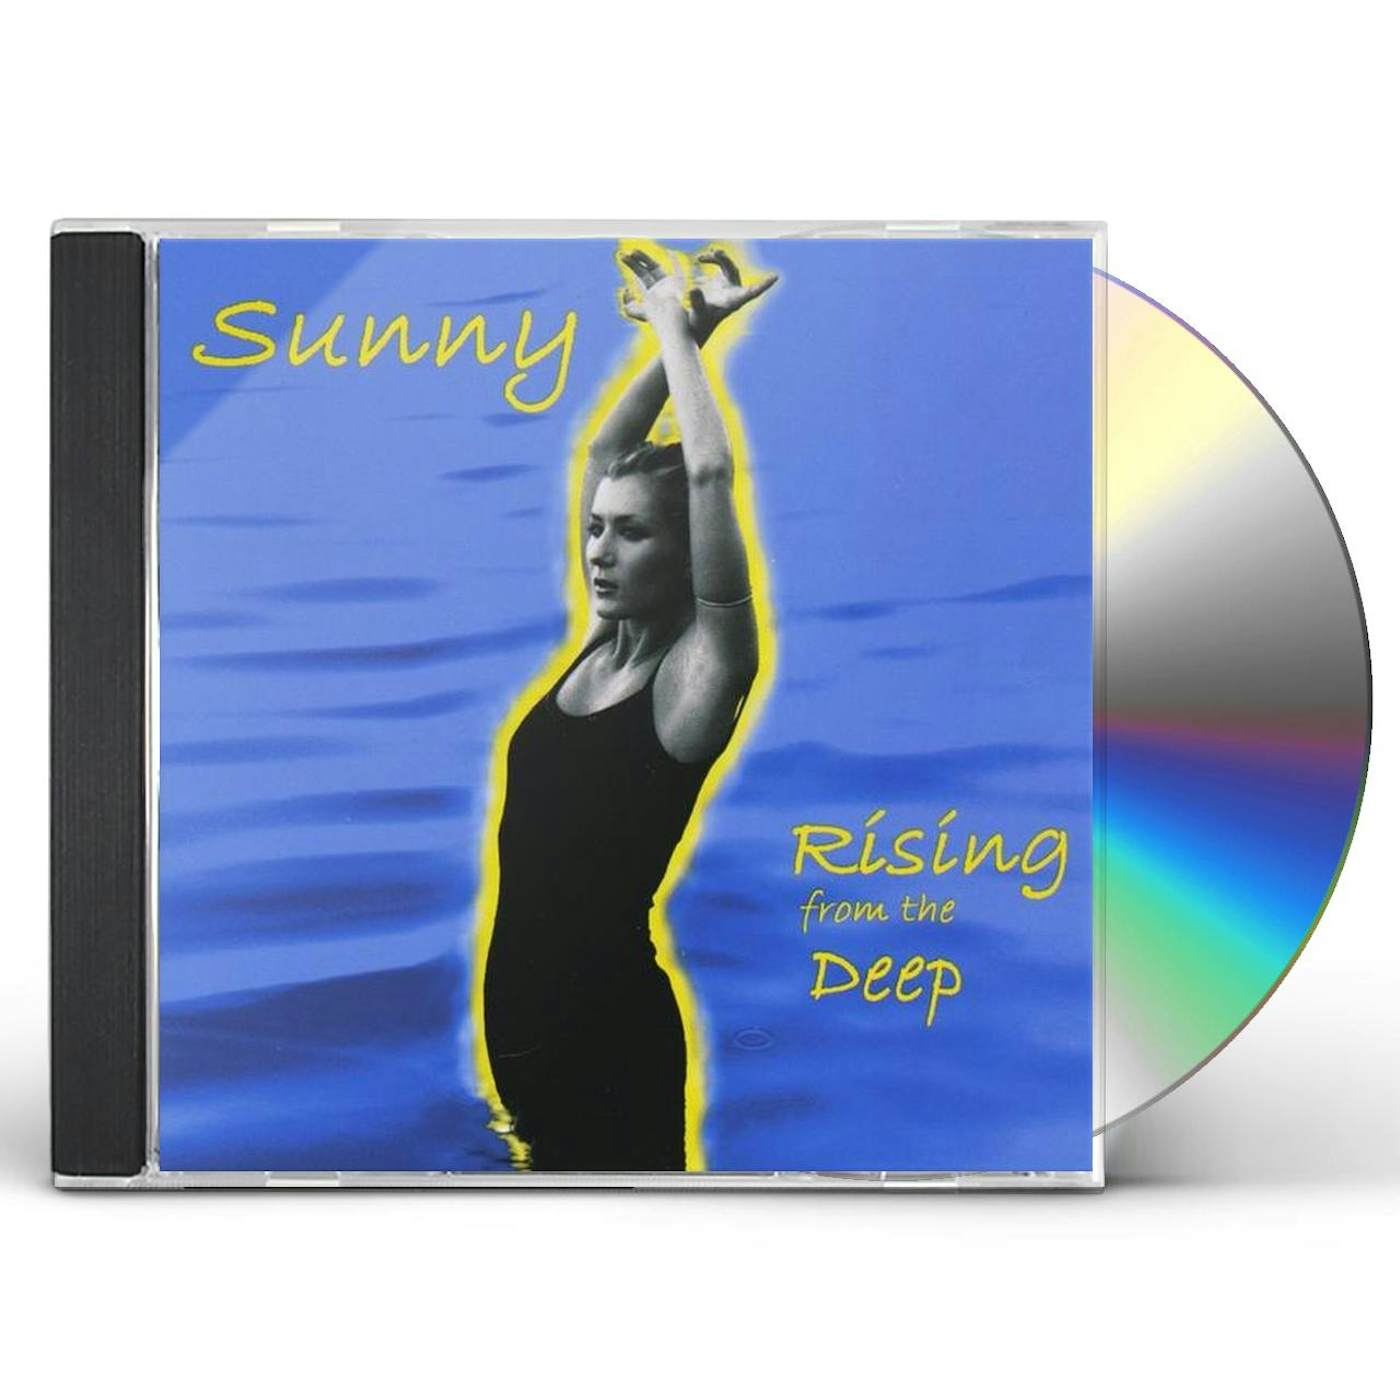 SUNNY RISING FROM THE DEEP CD